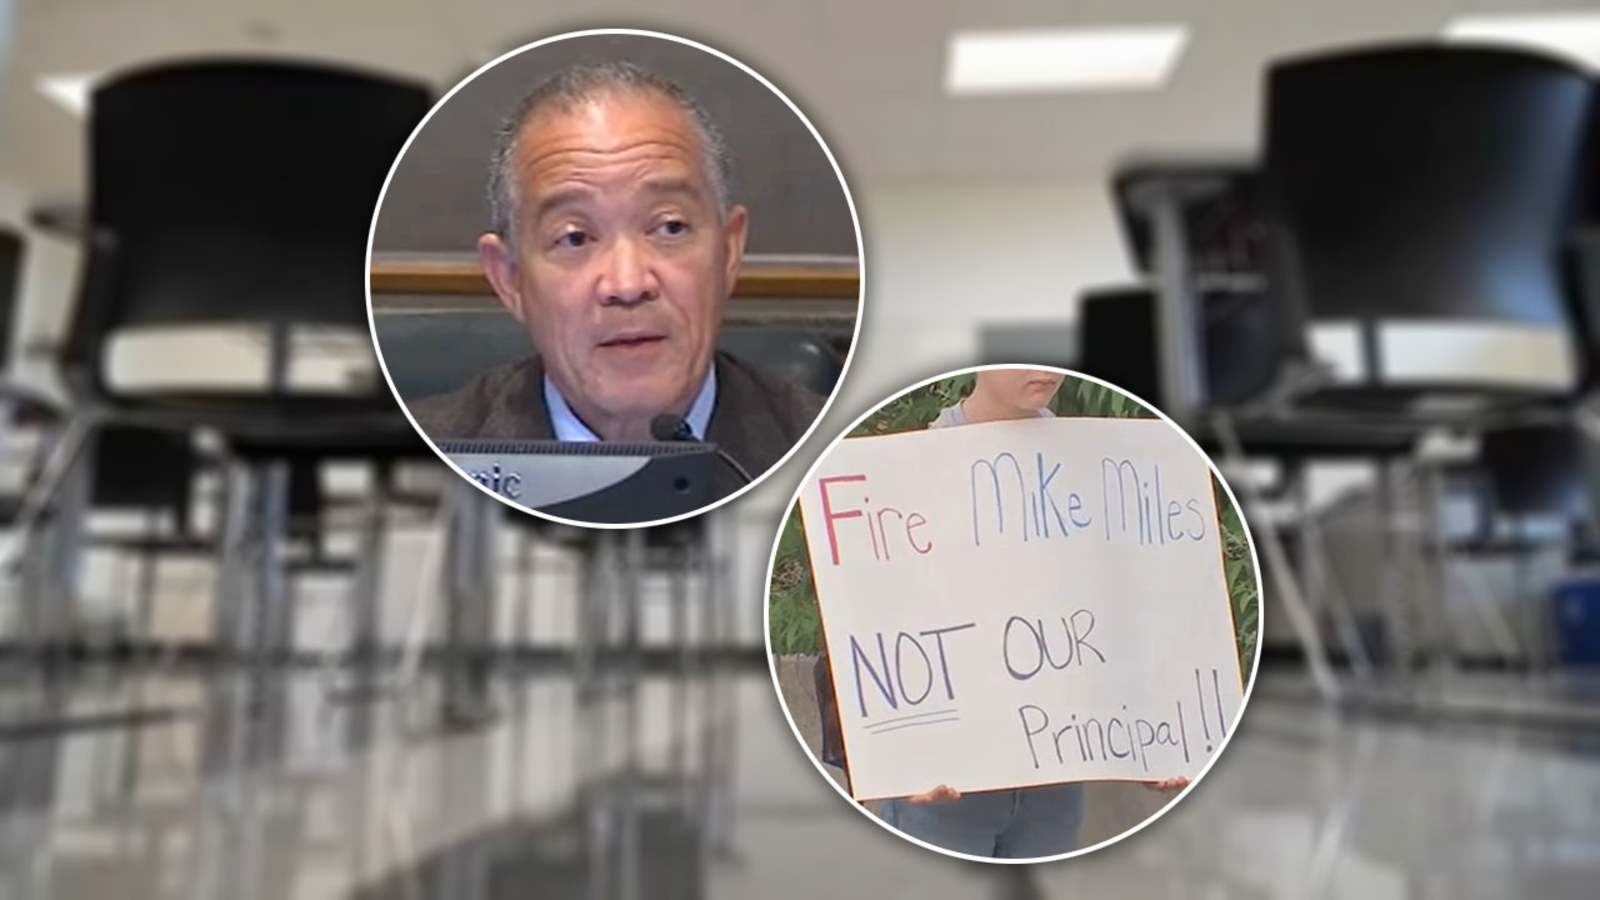 Houston ISD superintendent scandal: ‘Students Against Mike Miles’ plan walkout as Texas Education Agency launches investigation [Video]